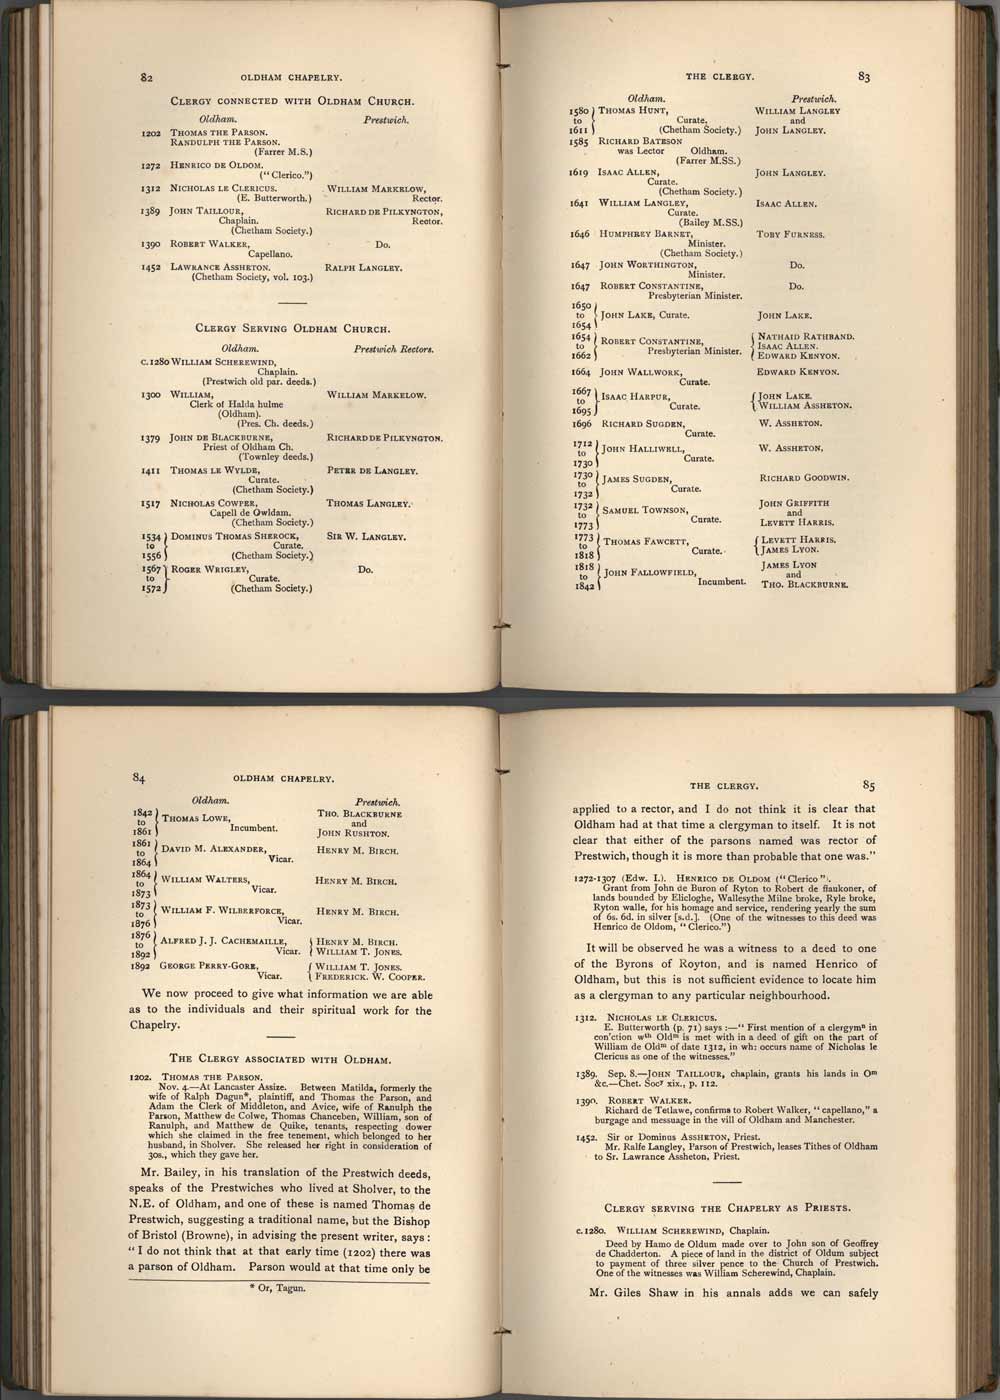 from: List of Clergy from 1202 until 1892